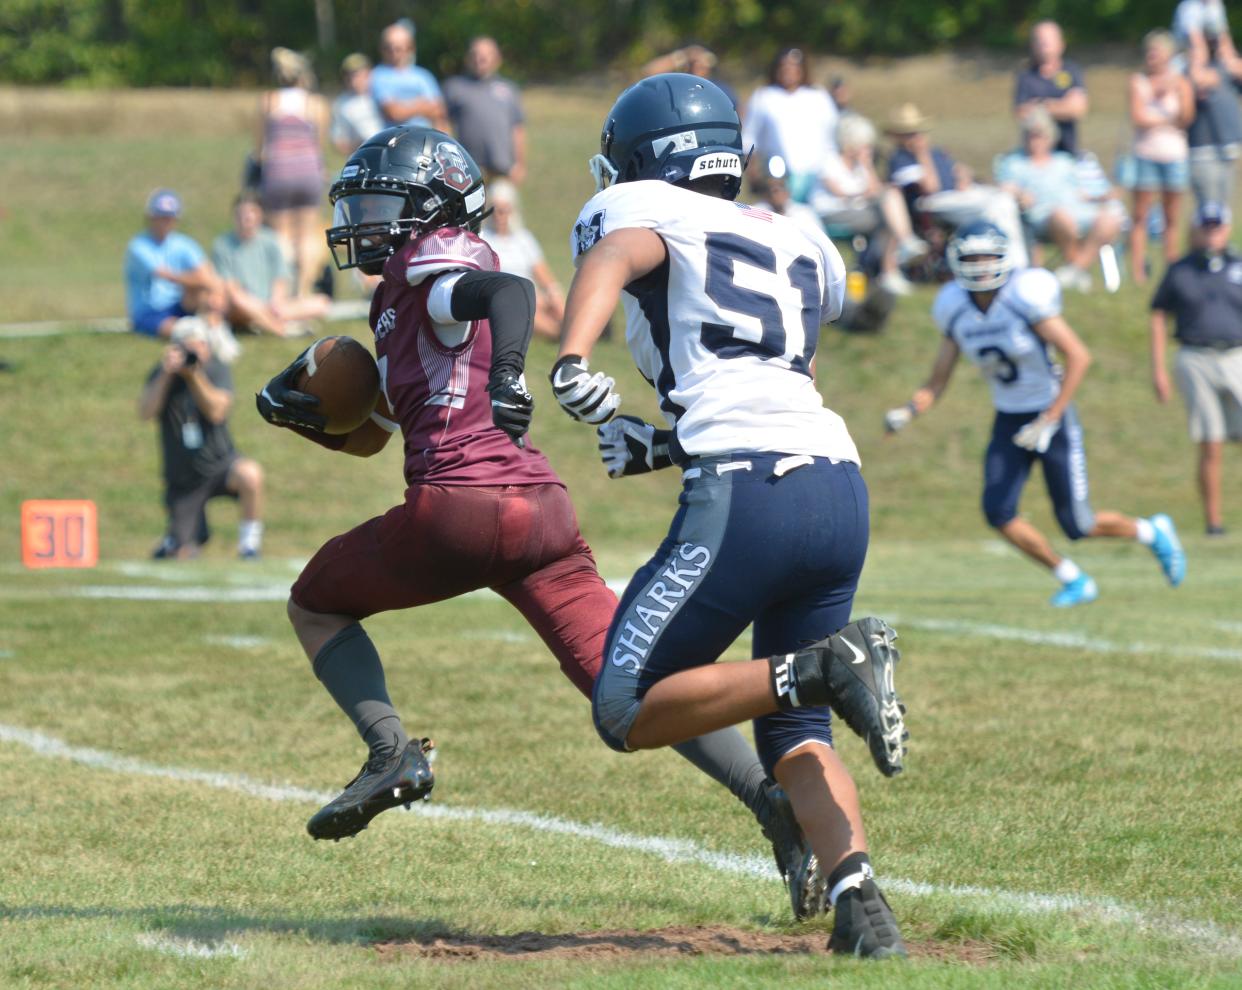 Cape Tech's Sean Gillette, left, looks toward the goal line before being tackled by Monomoy's Sean Needham in a second quarter play.